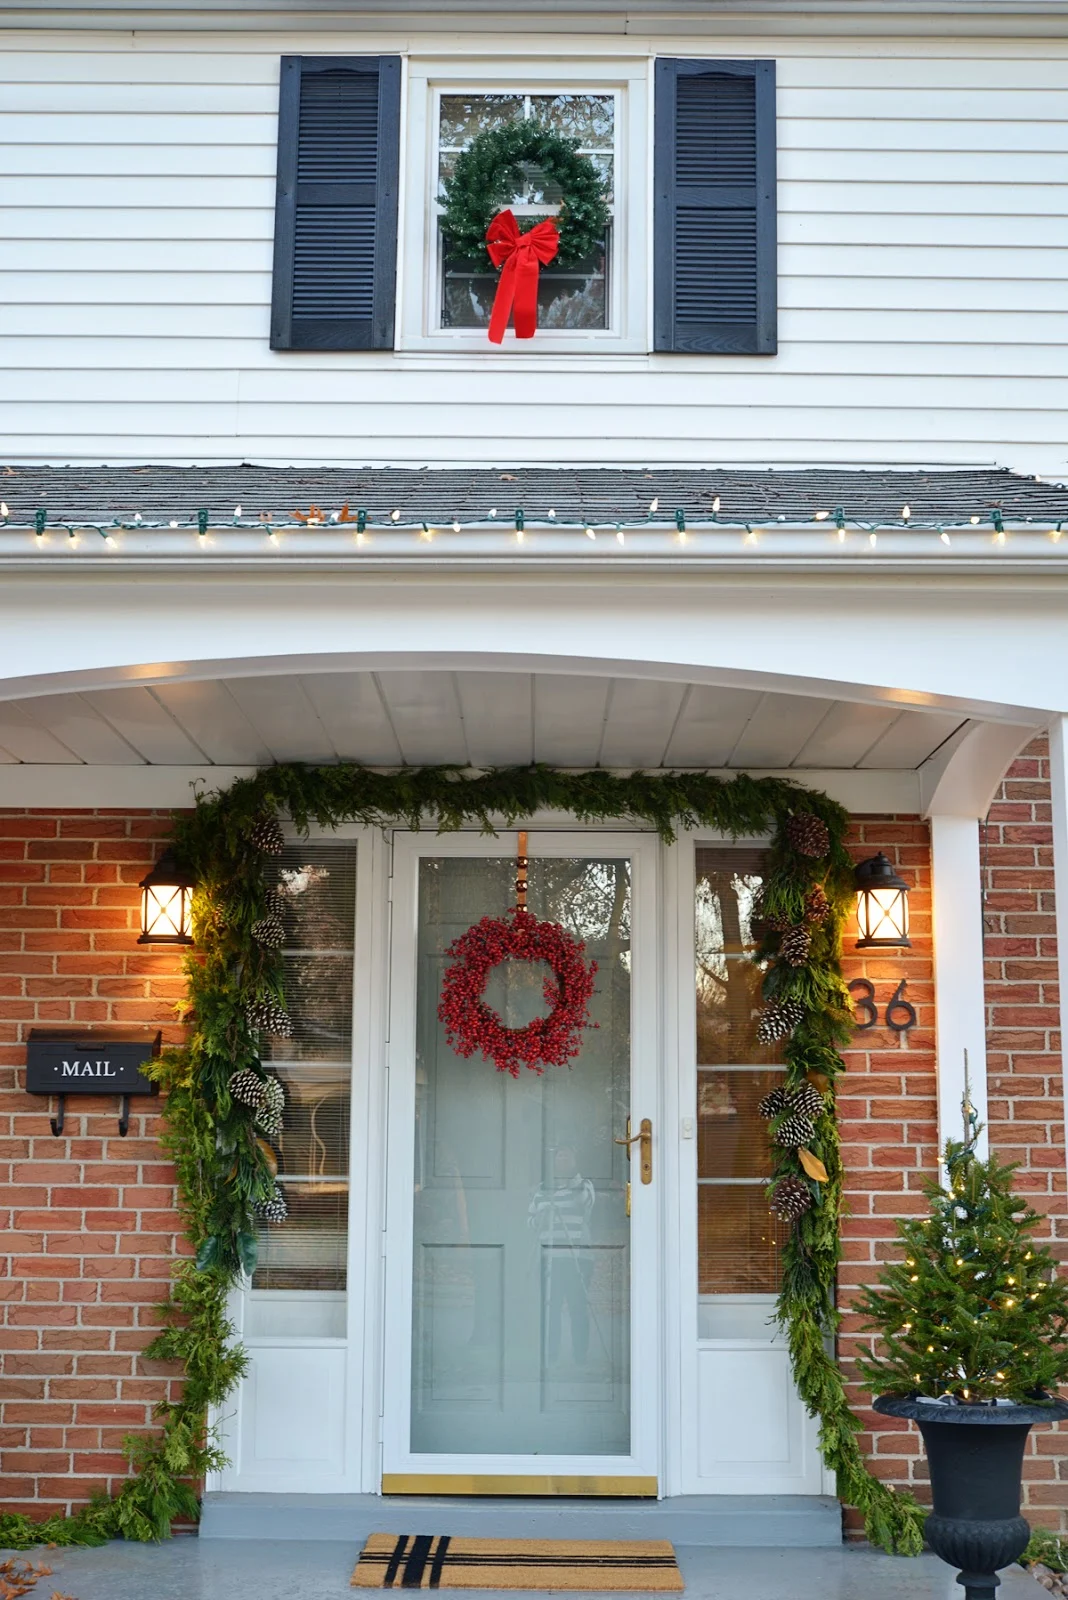 red brick classic house, christmas garland around door, coastal outdoor lighting, mailbox with decal, trees in urn